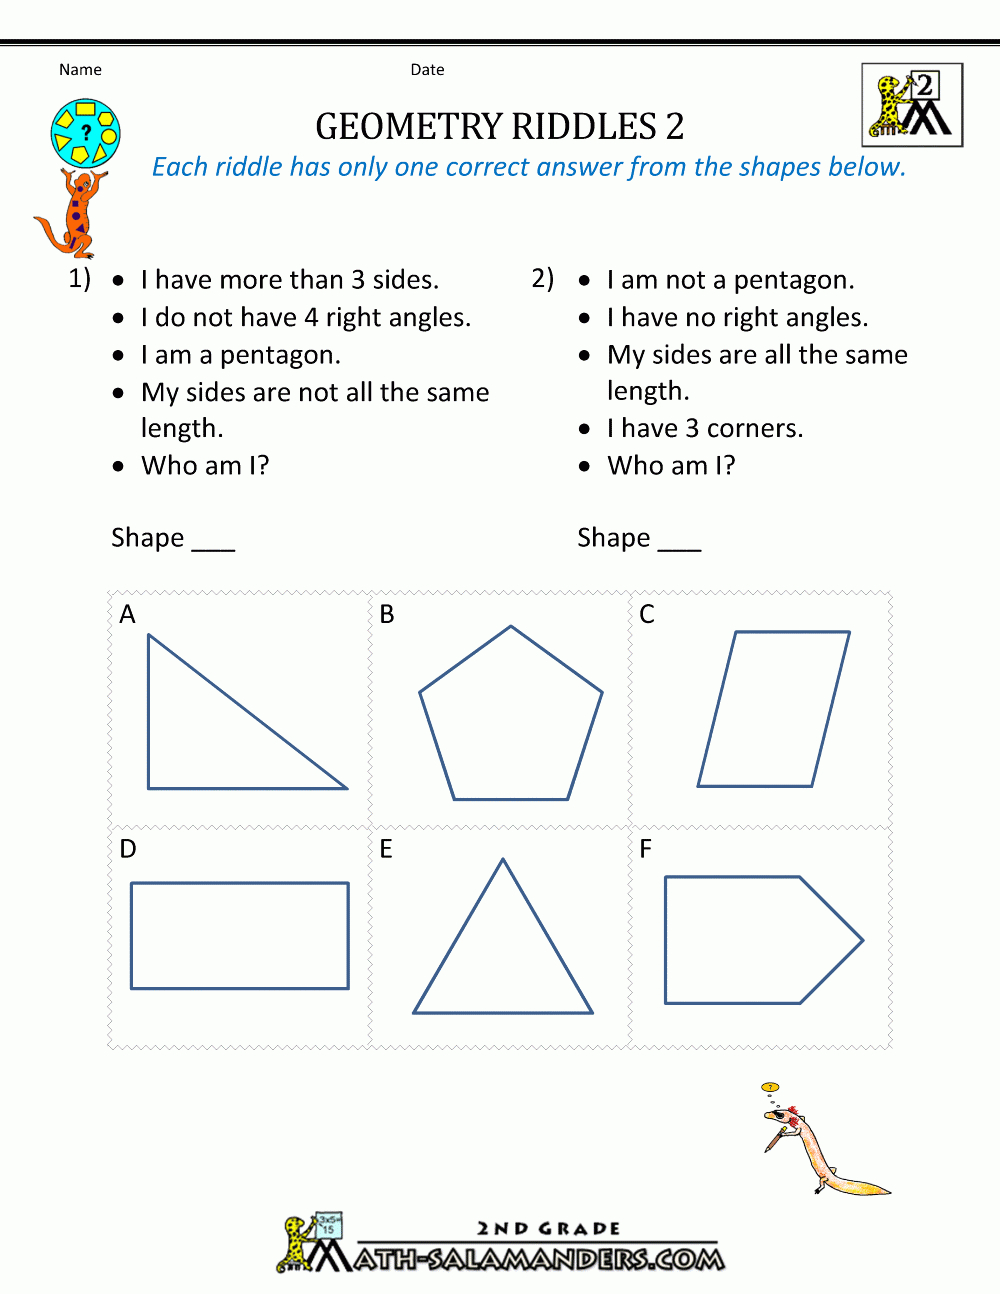 free-geometry-worksheets-2nd-grade-geometry-riddles-db-excel